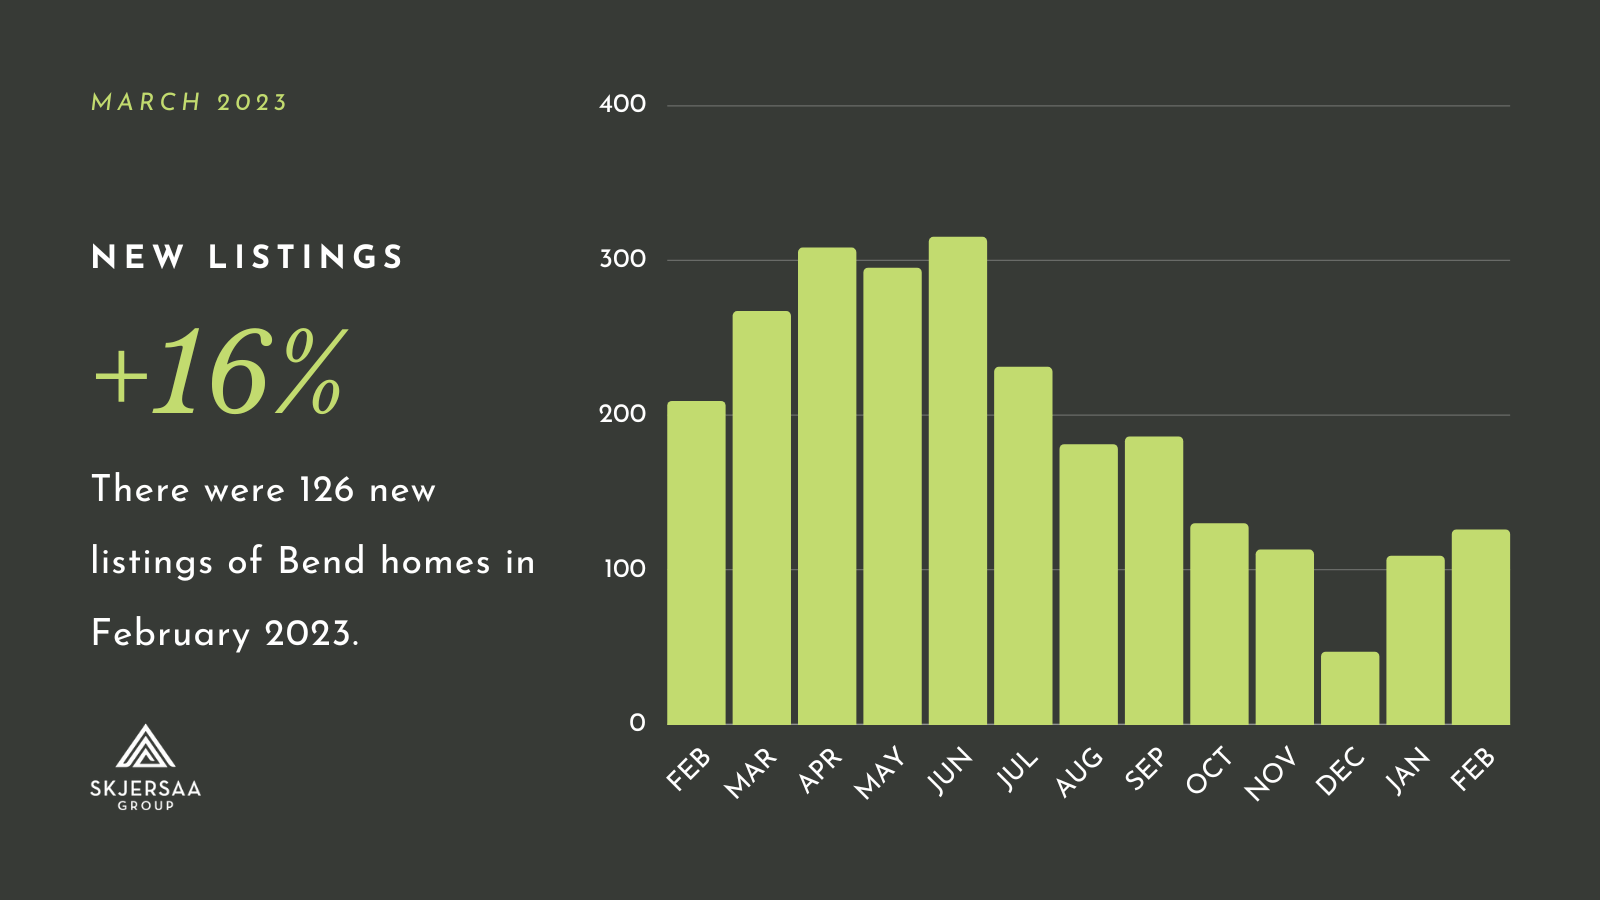 Bar graph showing a 13-month trend of new listings of homes in Bend, Oregon